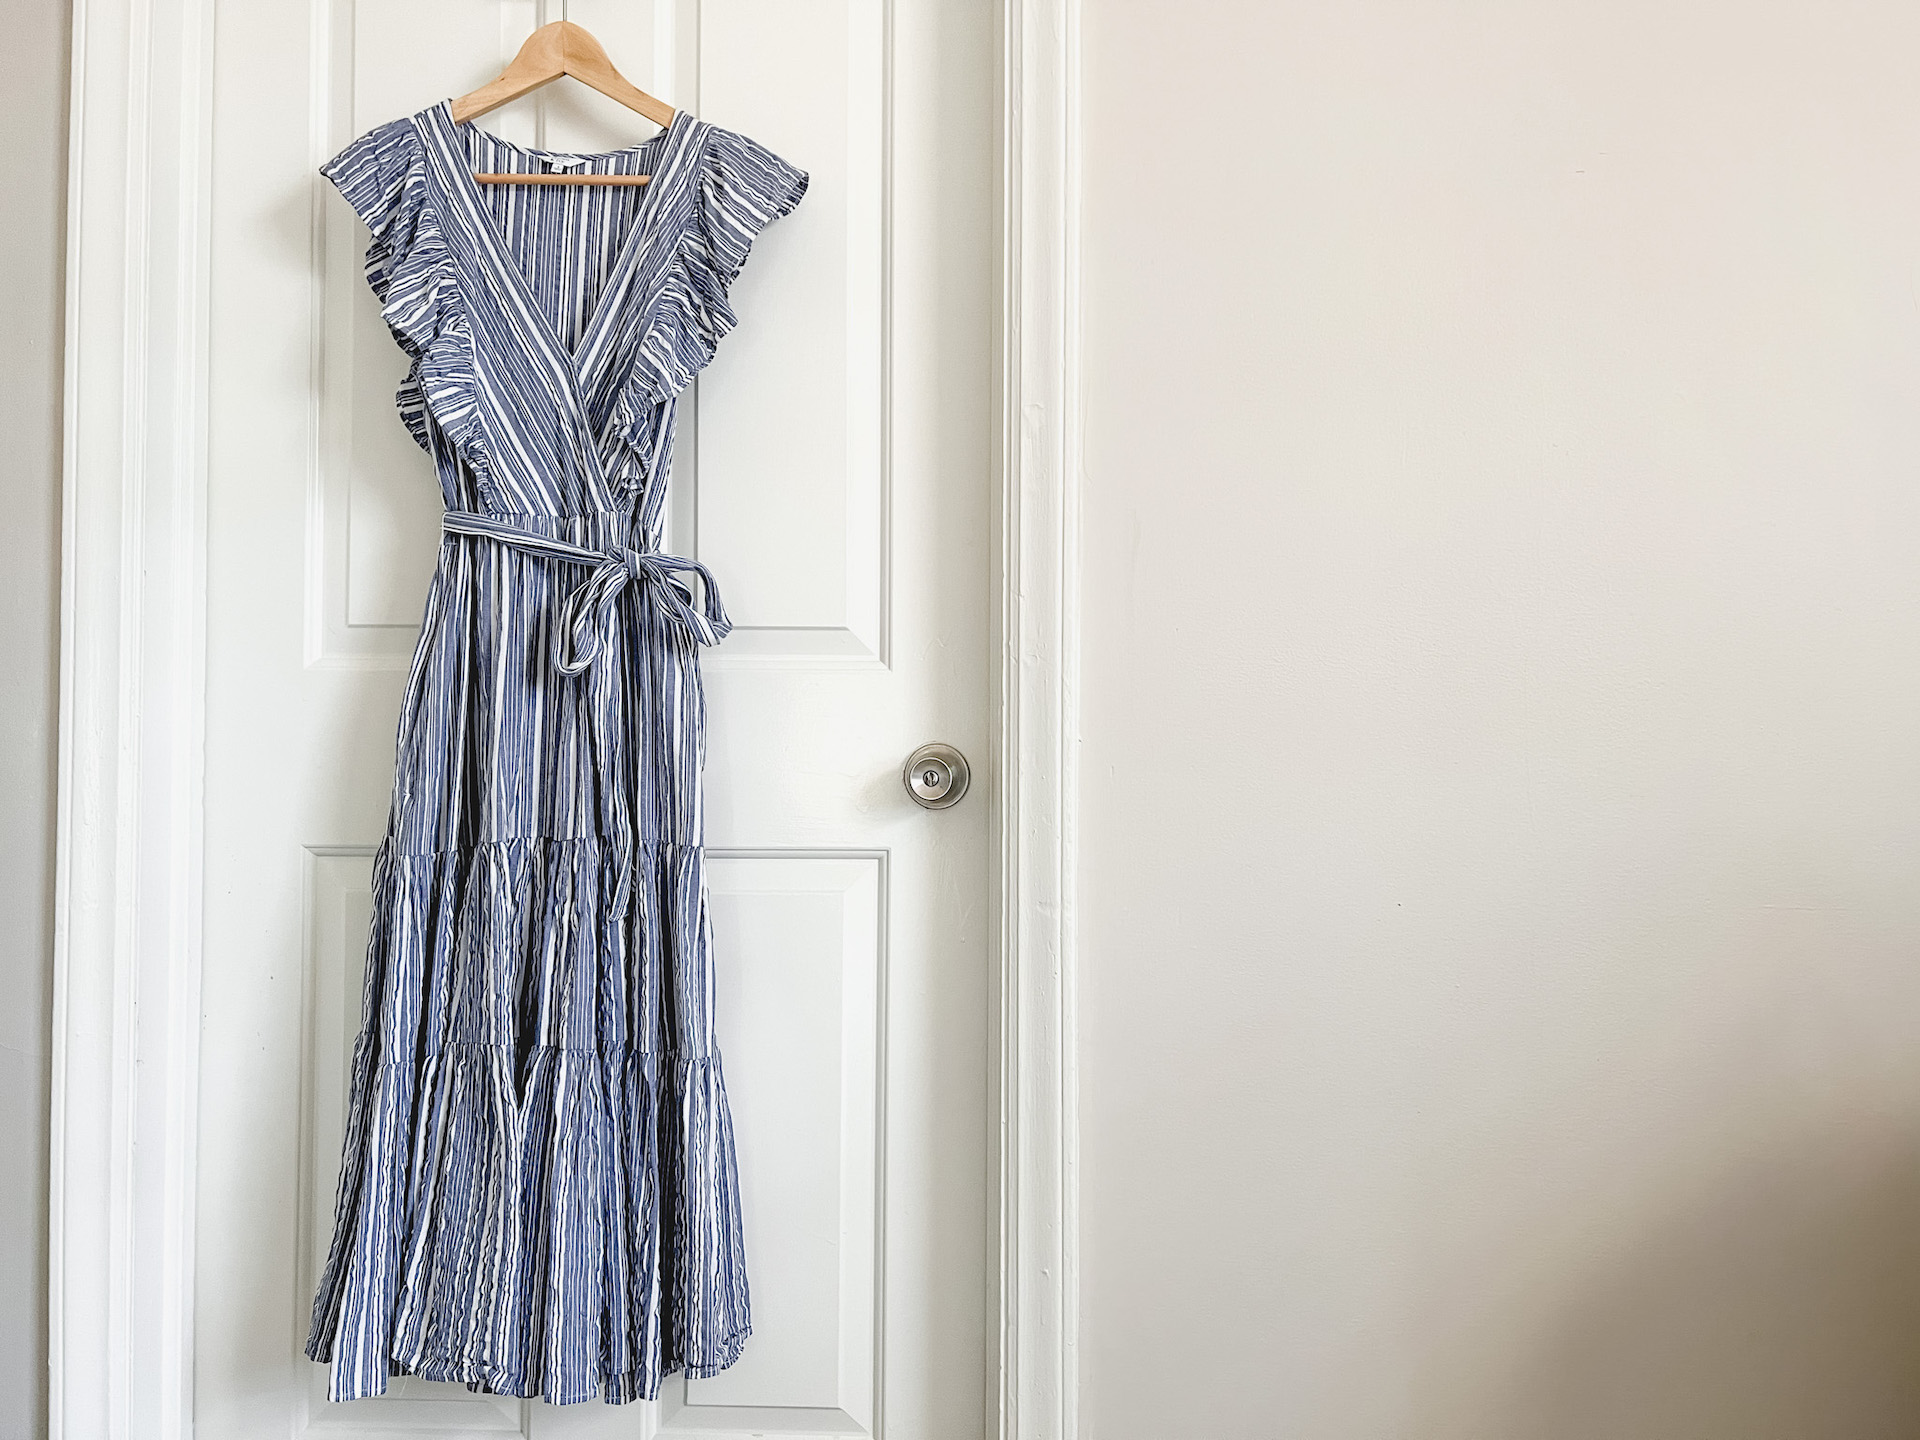 A ruffled blue and white striped dress hangs on a wooden hanger against a white door.